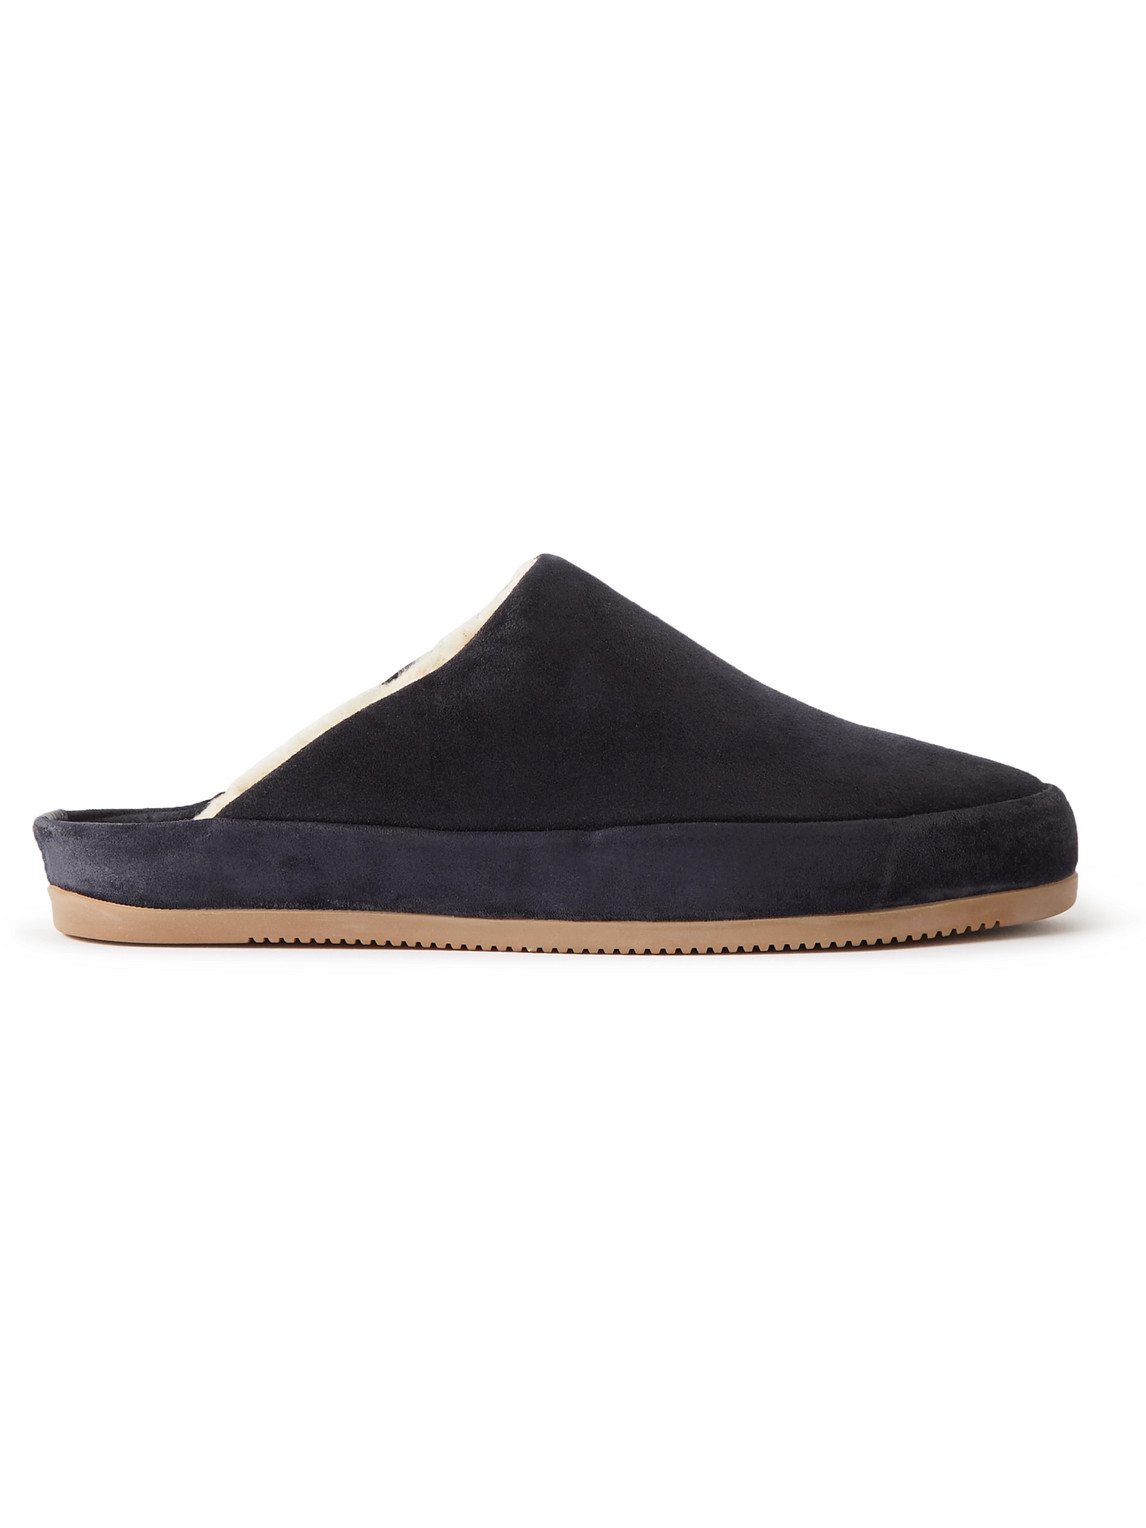 Mulo - Shearling-Lined Suede Slippers - Men - Blue - UK 9 von Mulo